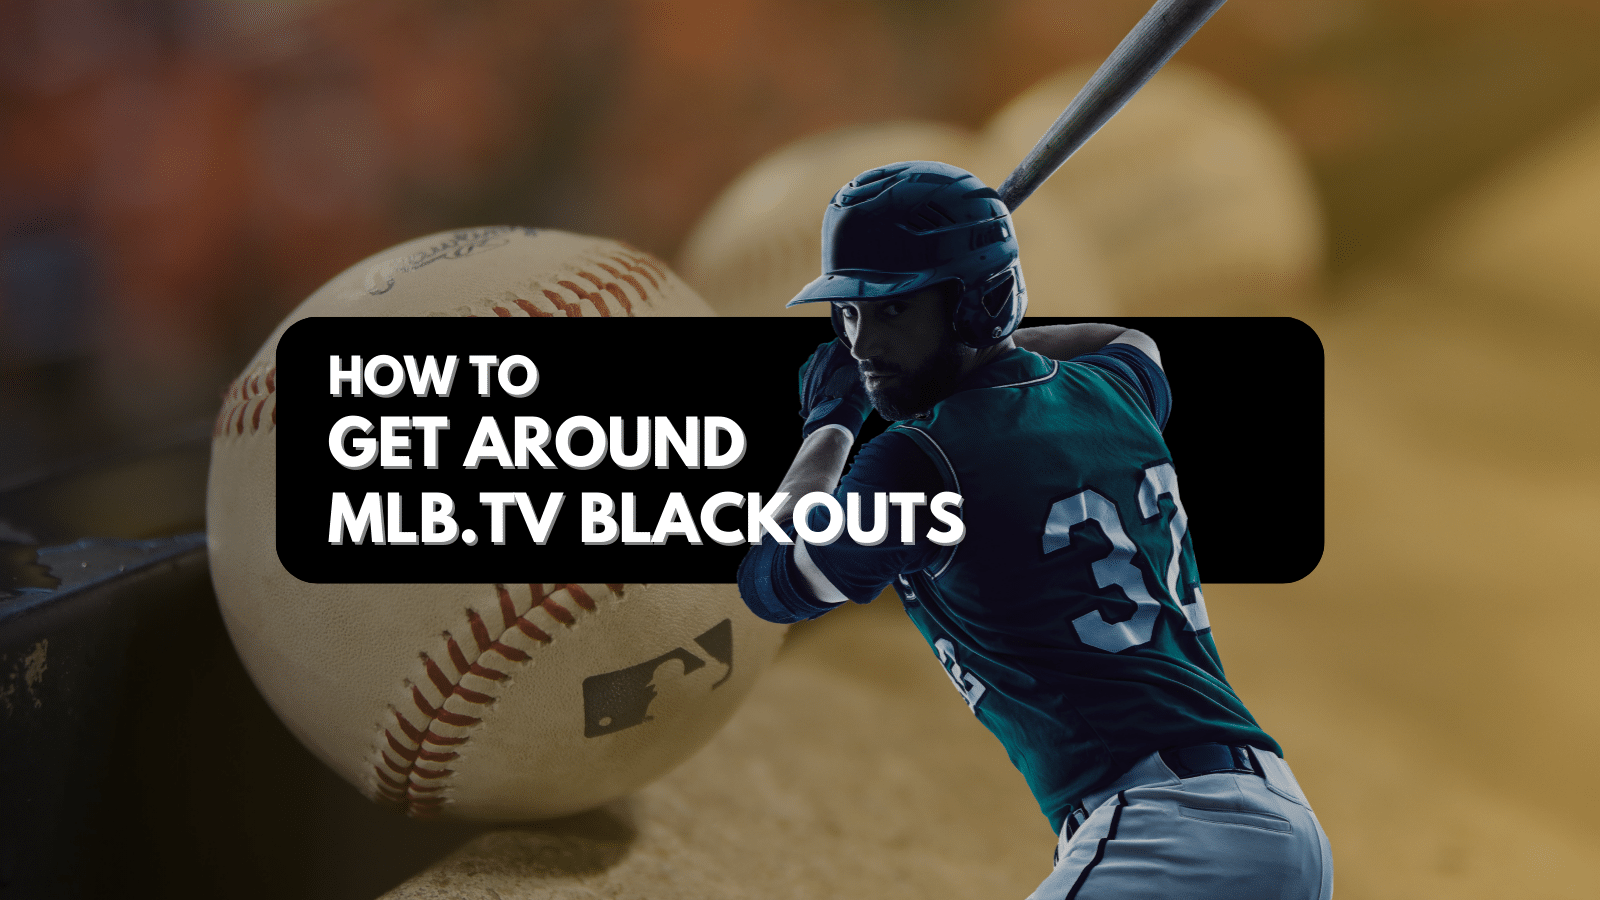 How To Get Around Those MLBtv Blackouts